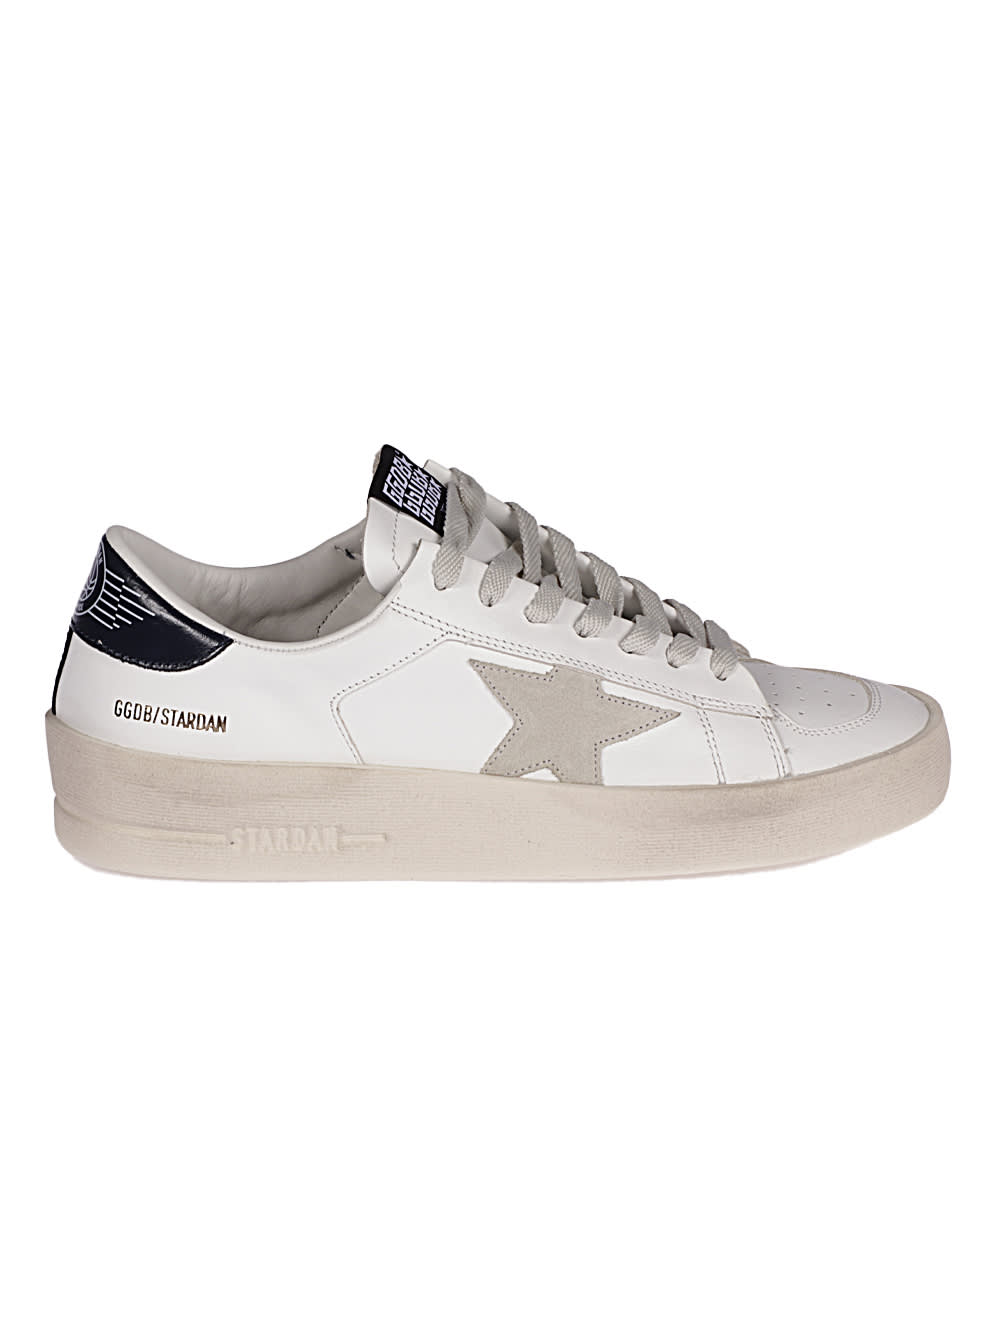 Golden Goose Stardan Leather Upper Suede Star Shiny Leather Hee